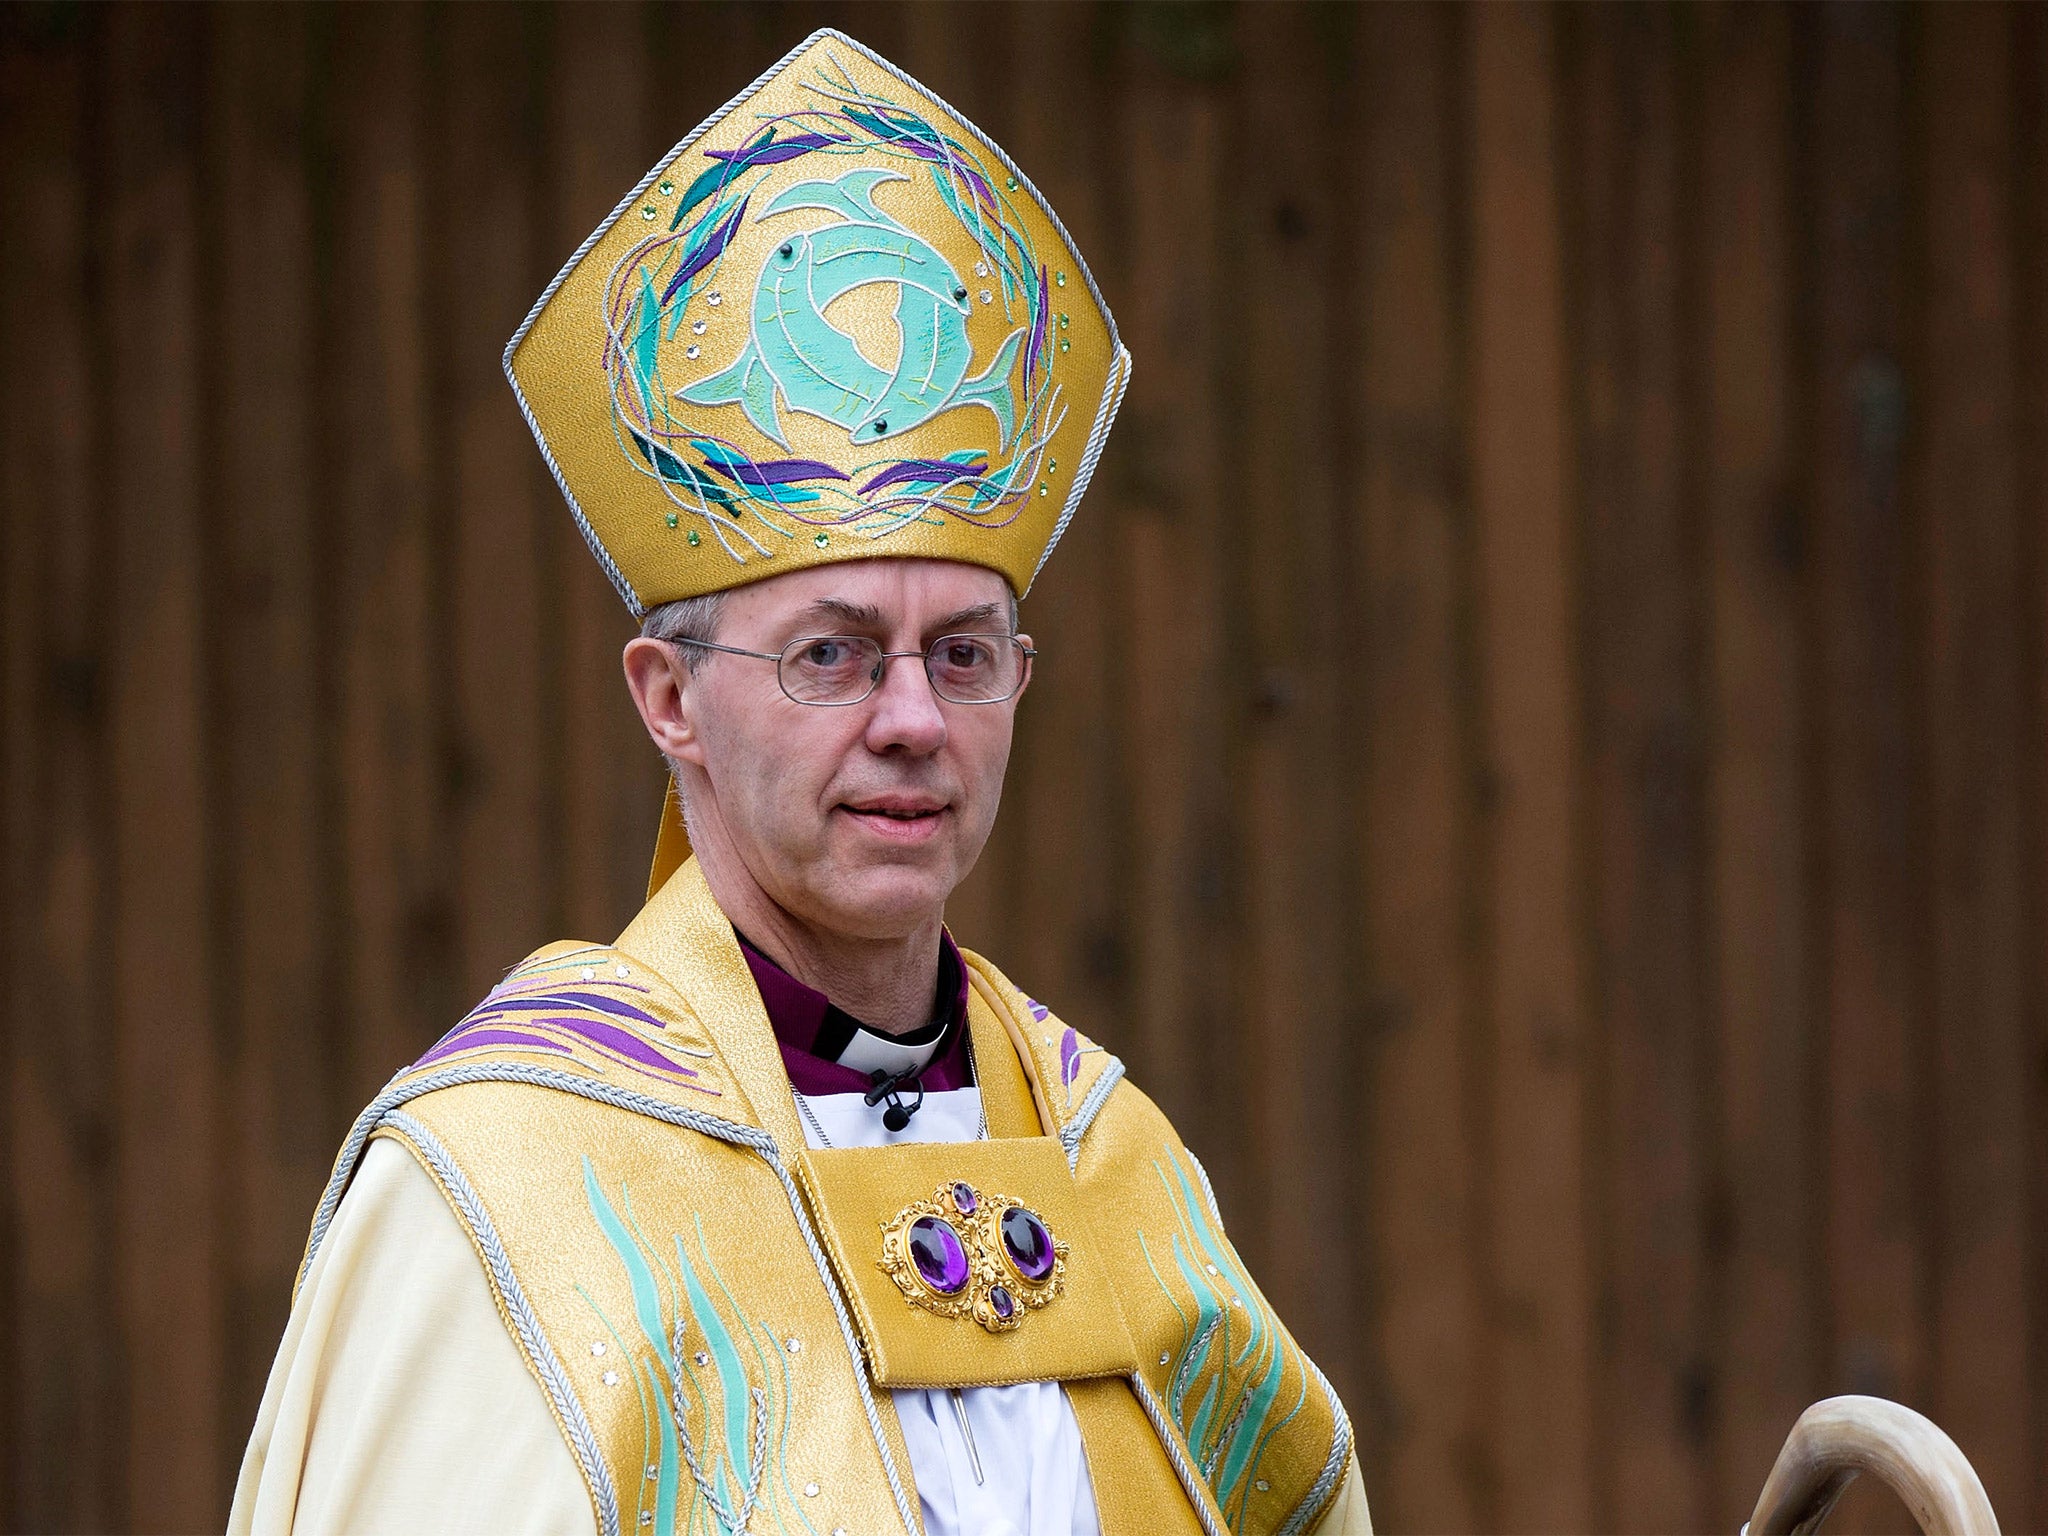 The Archbishop of Canterbury, Justin Welby, found growing up with an alcoholic father 'very painful'